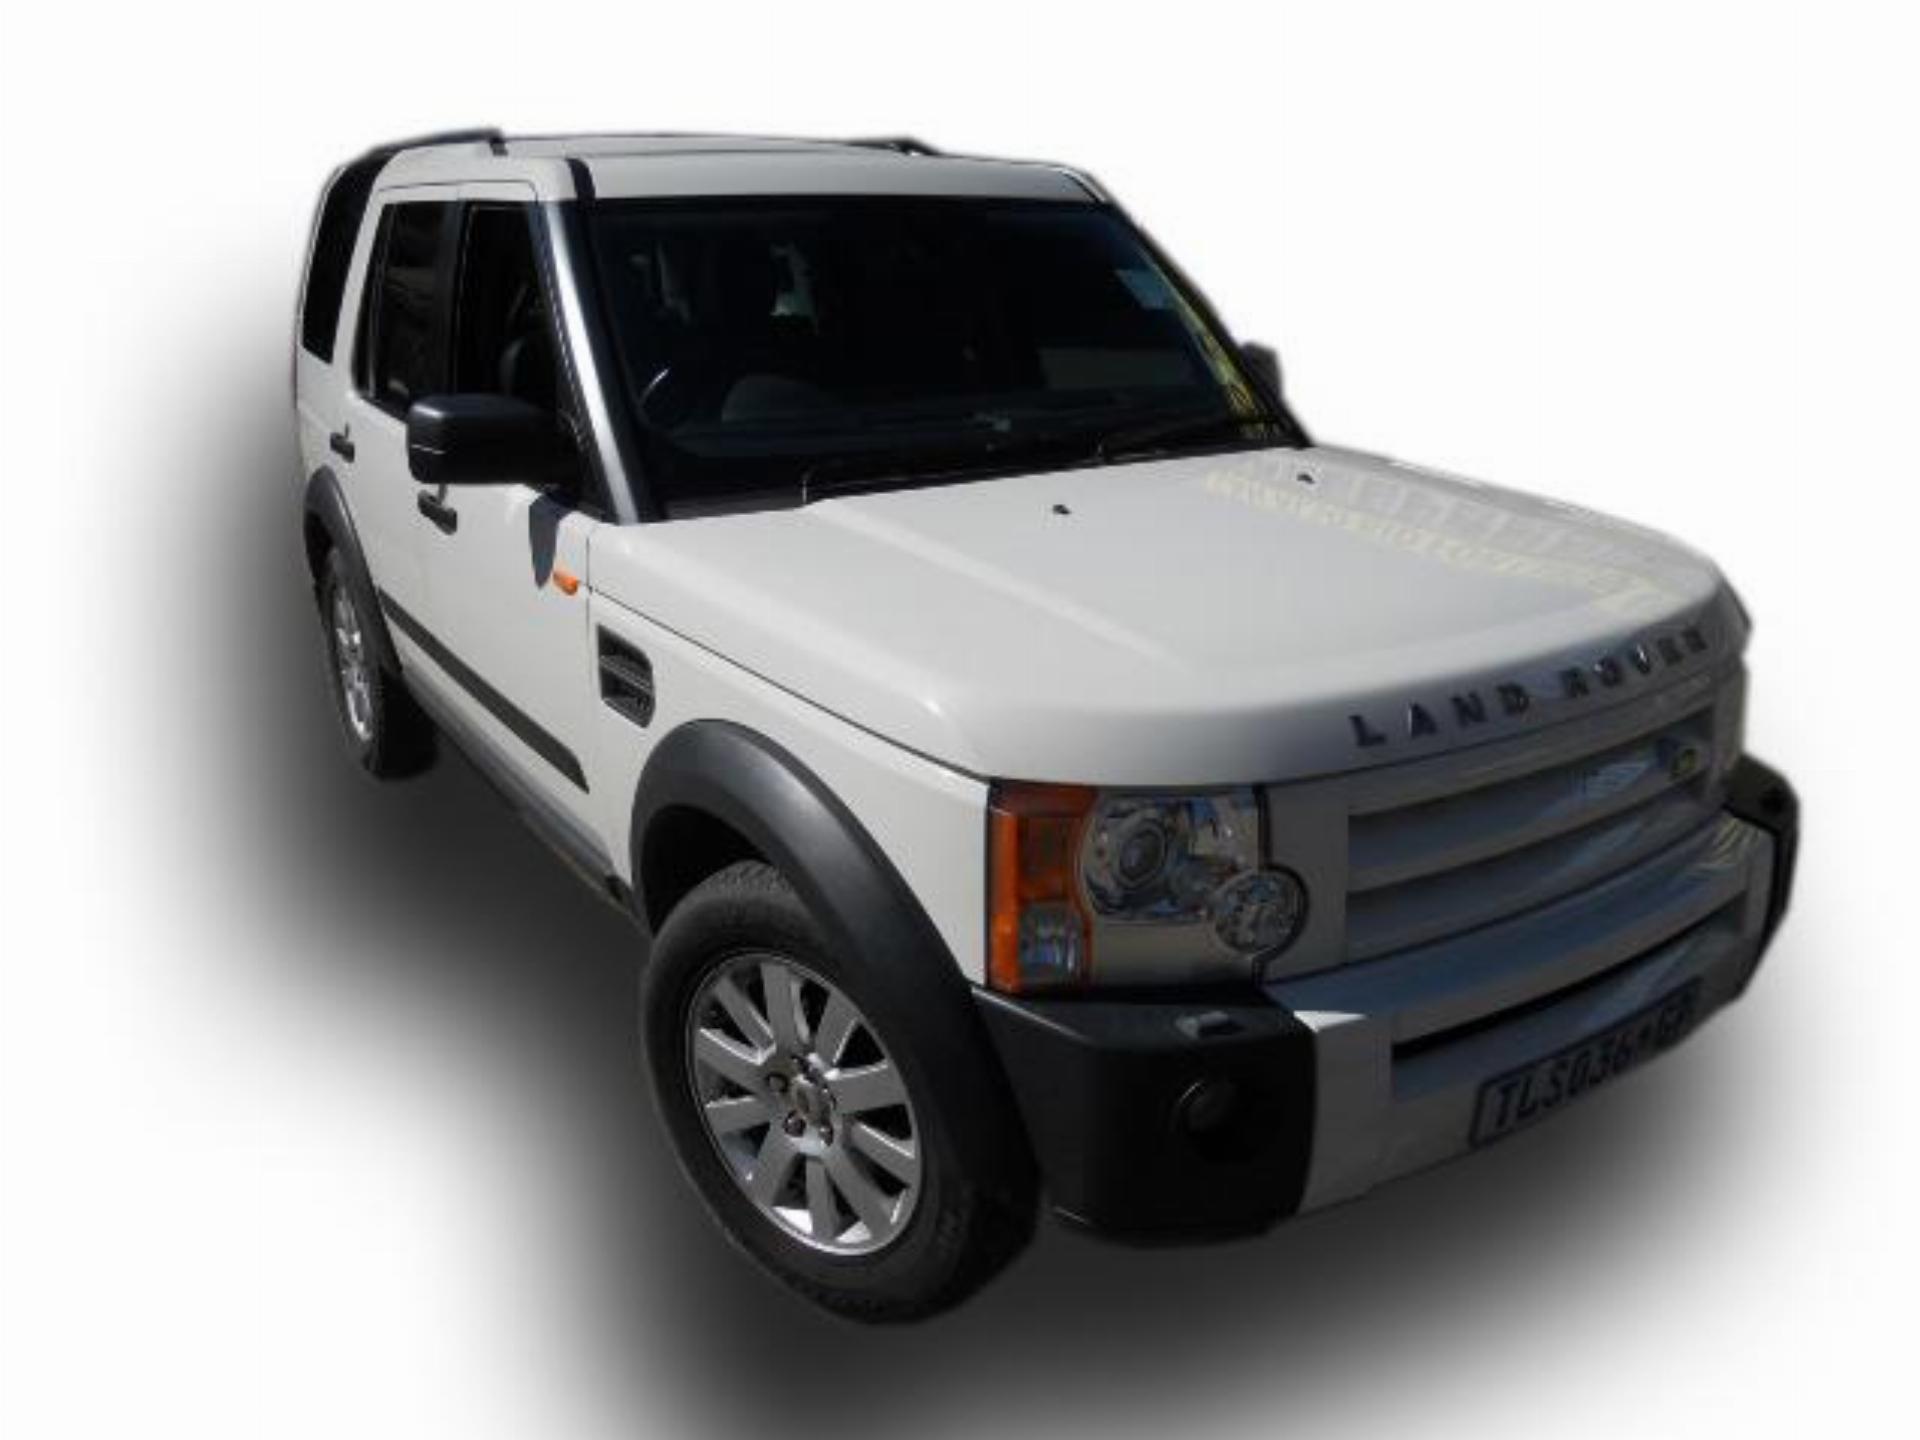 Repossessed Land Rover Discovery 3 V8 SE 2006 on auction